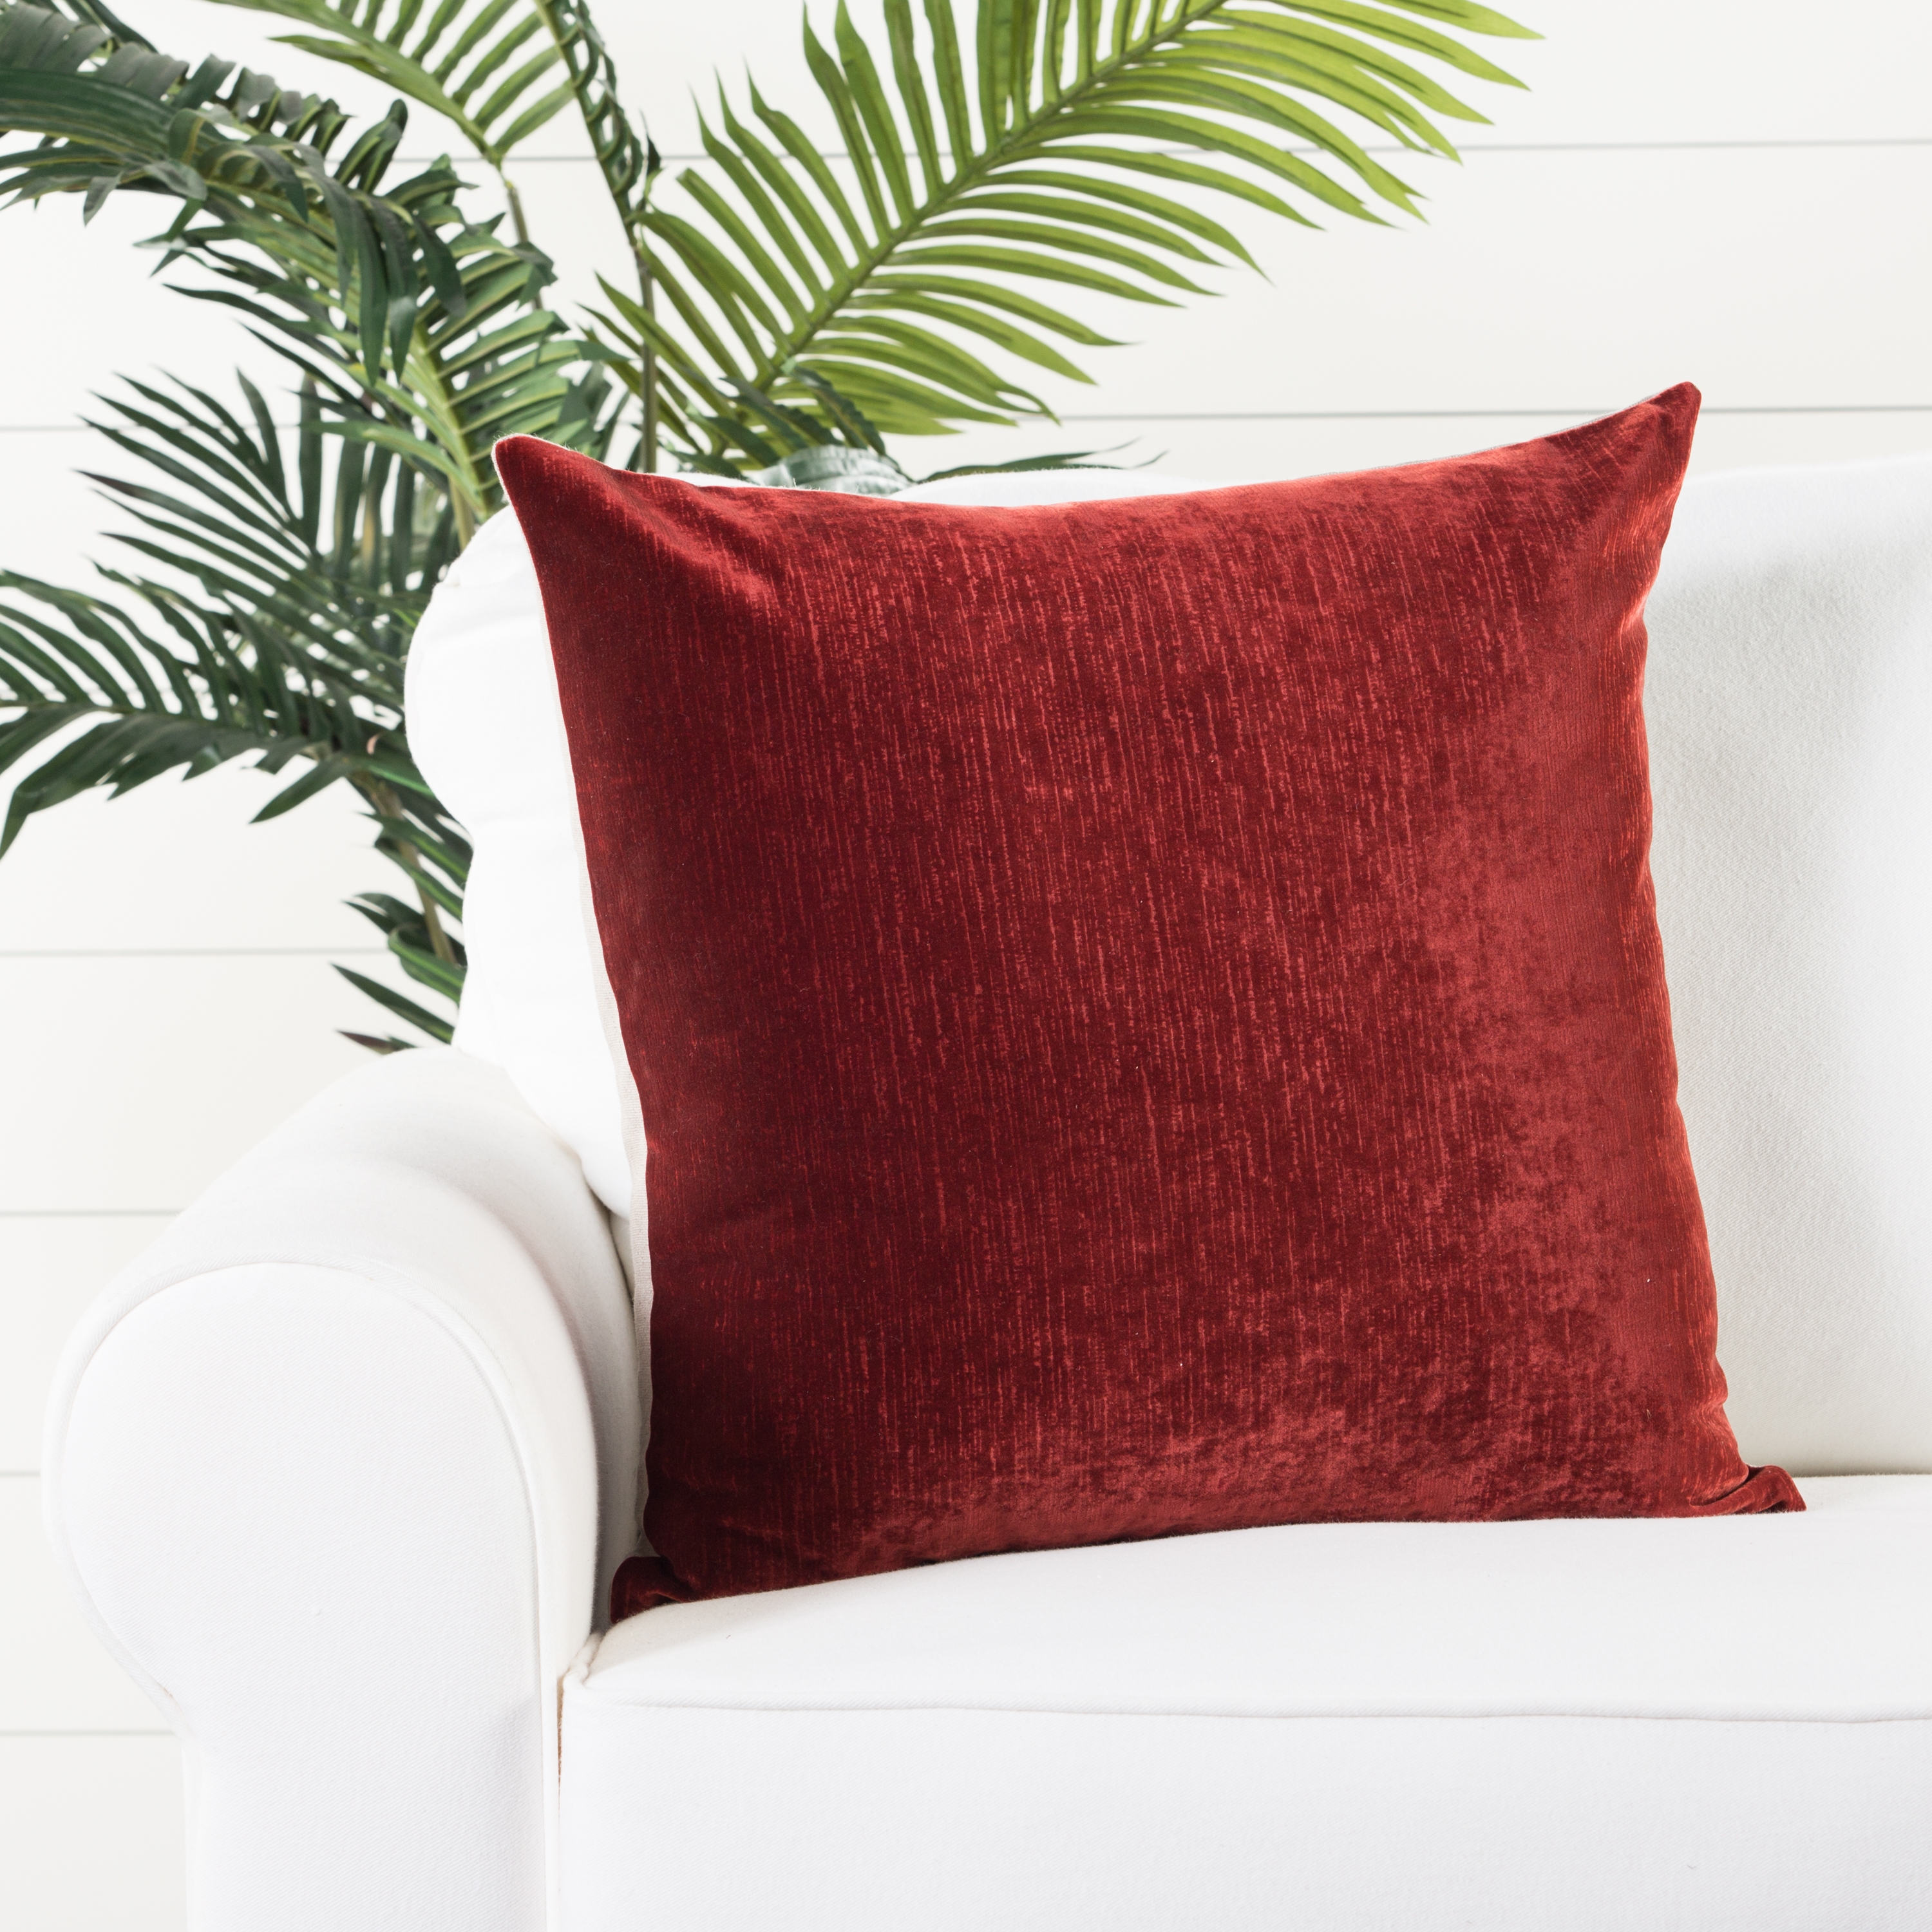 Design (US) Red 20"X20" Pillow - Image 3